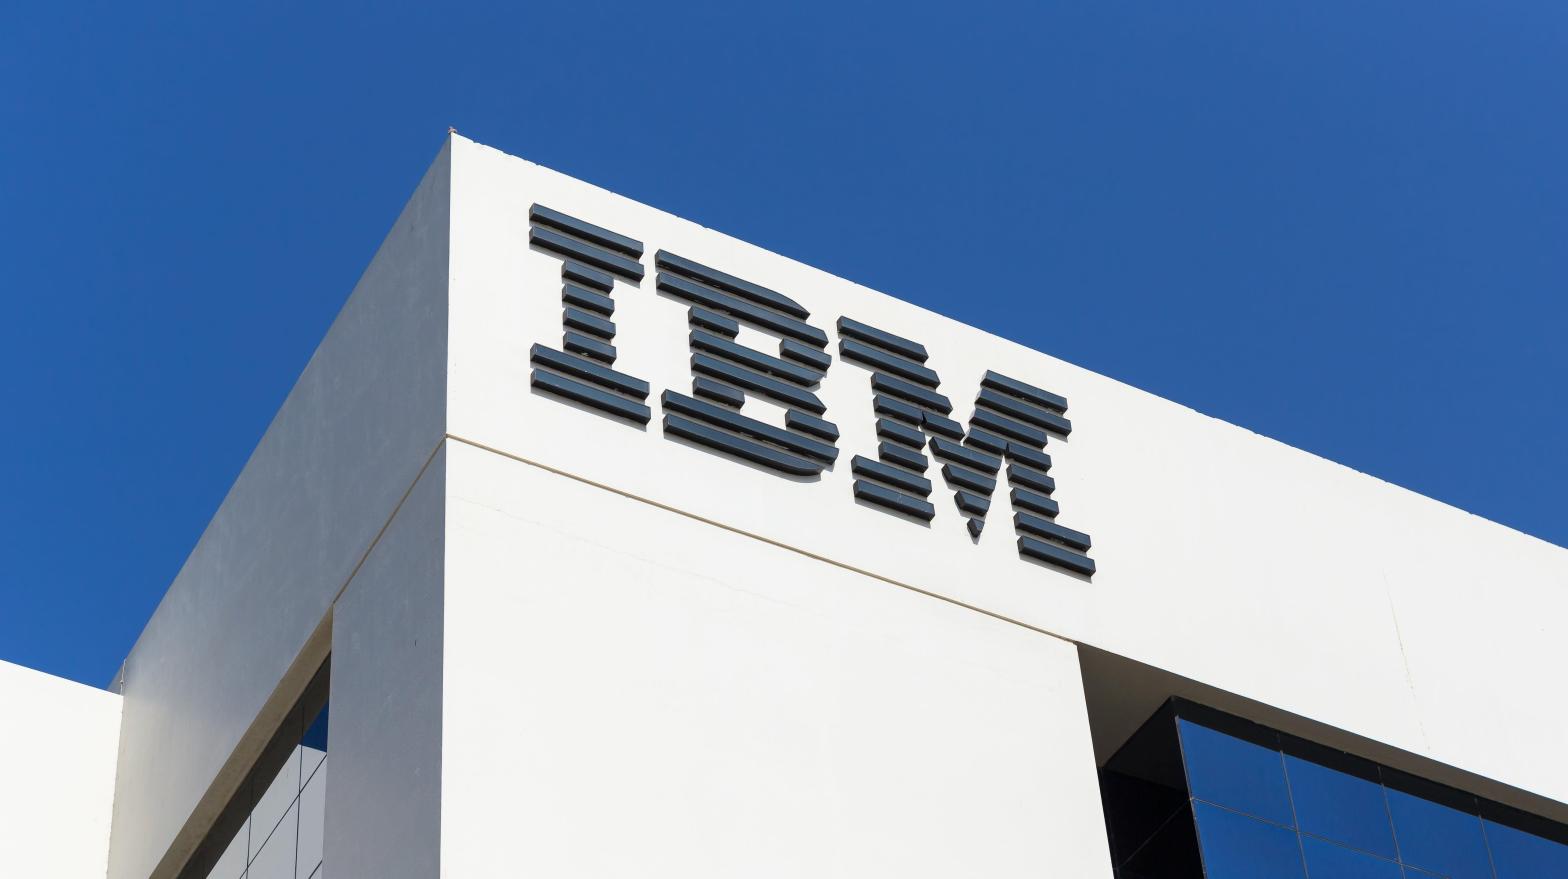 IBM decided to announce layoffs in January that would effect 3,900 positions — or roughly 1.5% of the company's staff at that time. (Image: Laborant, Shutterstock)